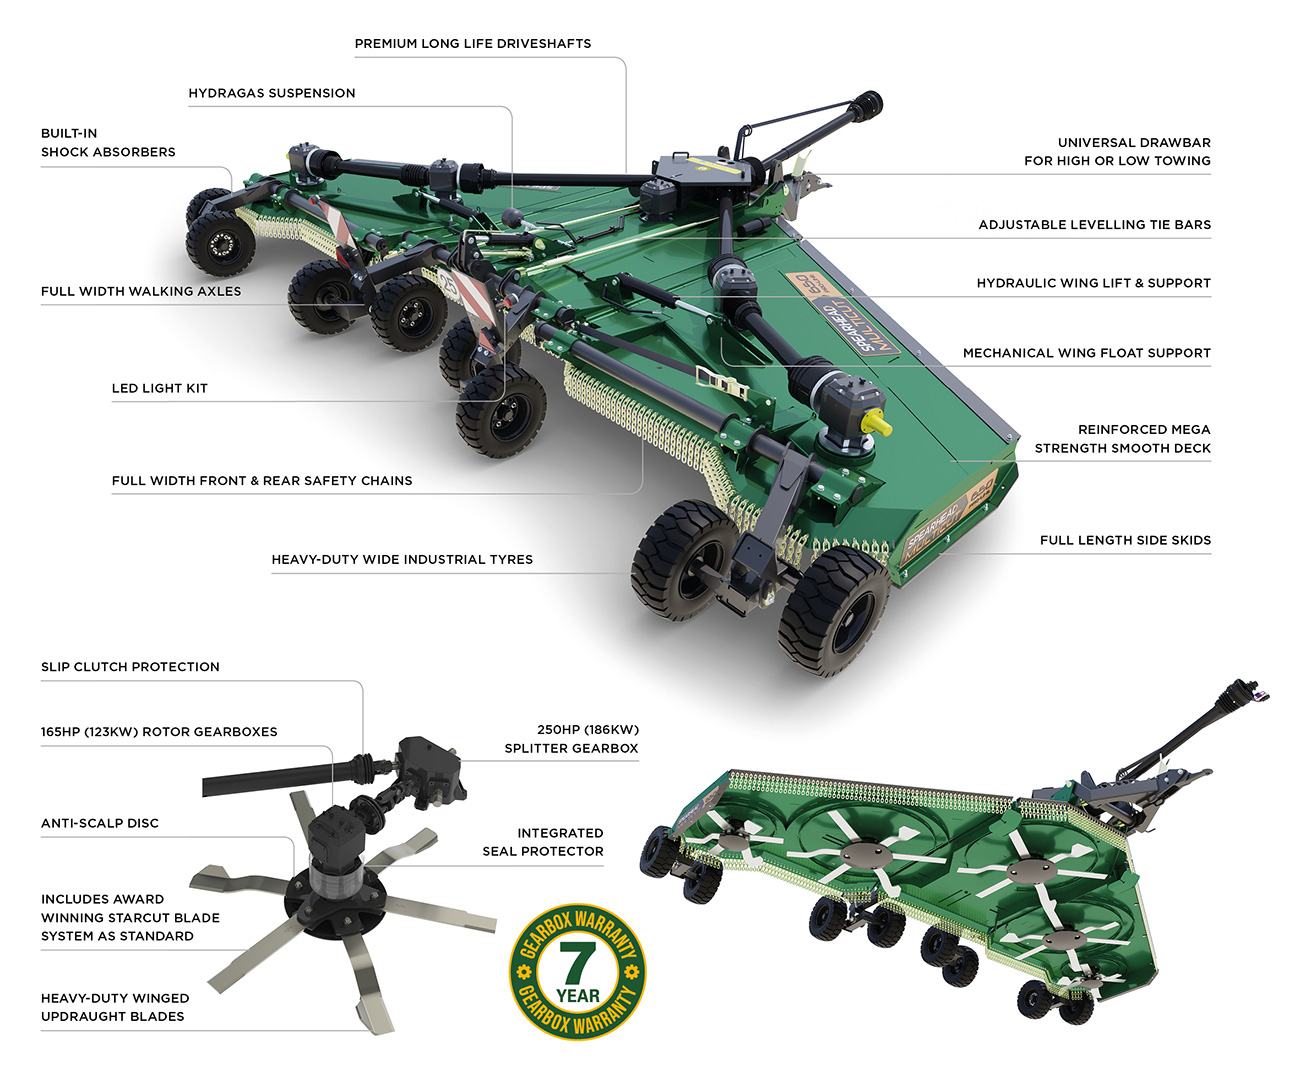 Multicut 650 Proline Rotary Mower features